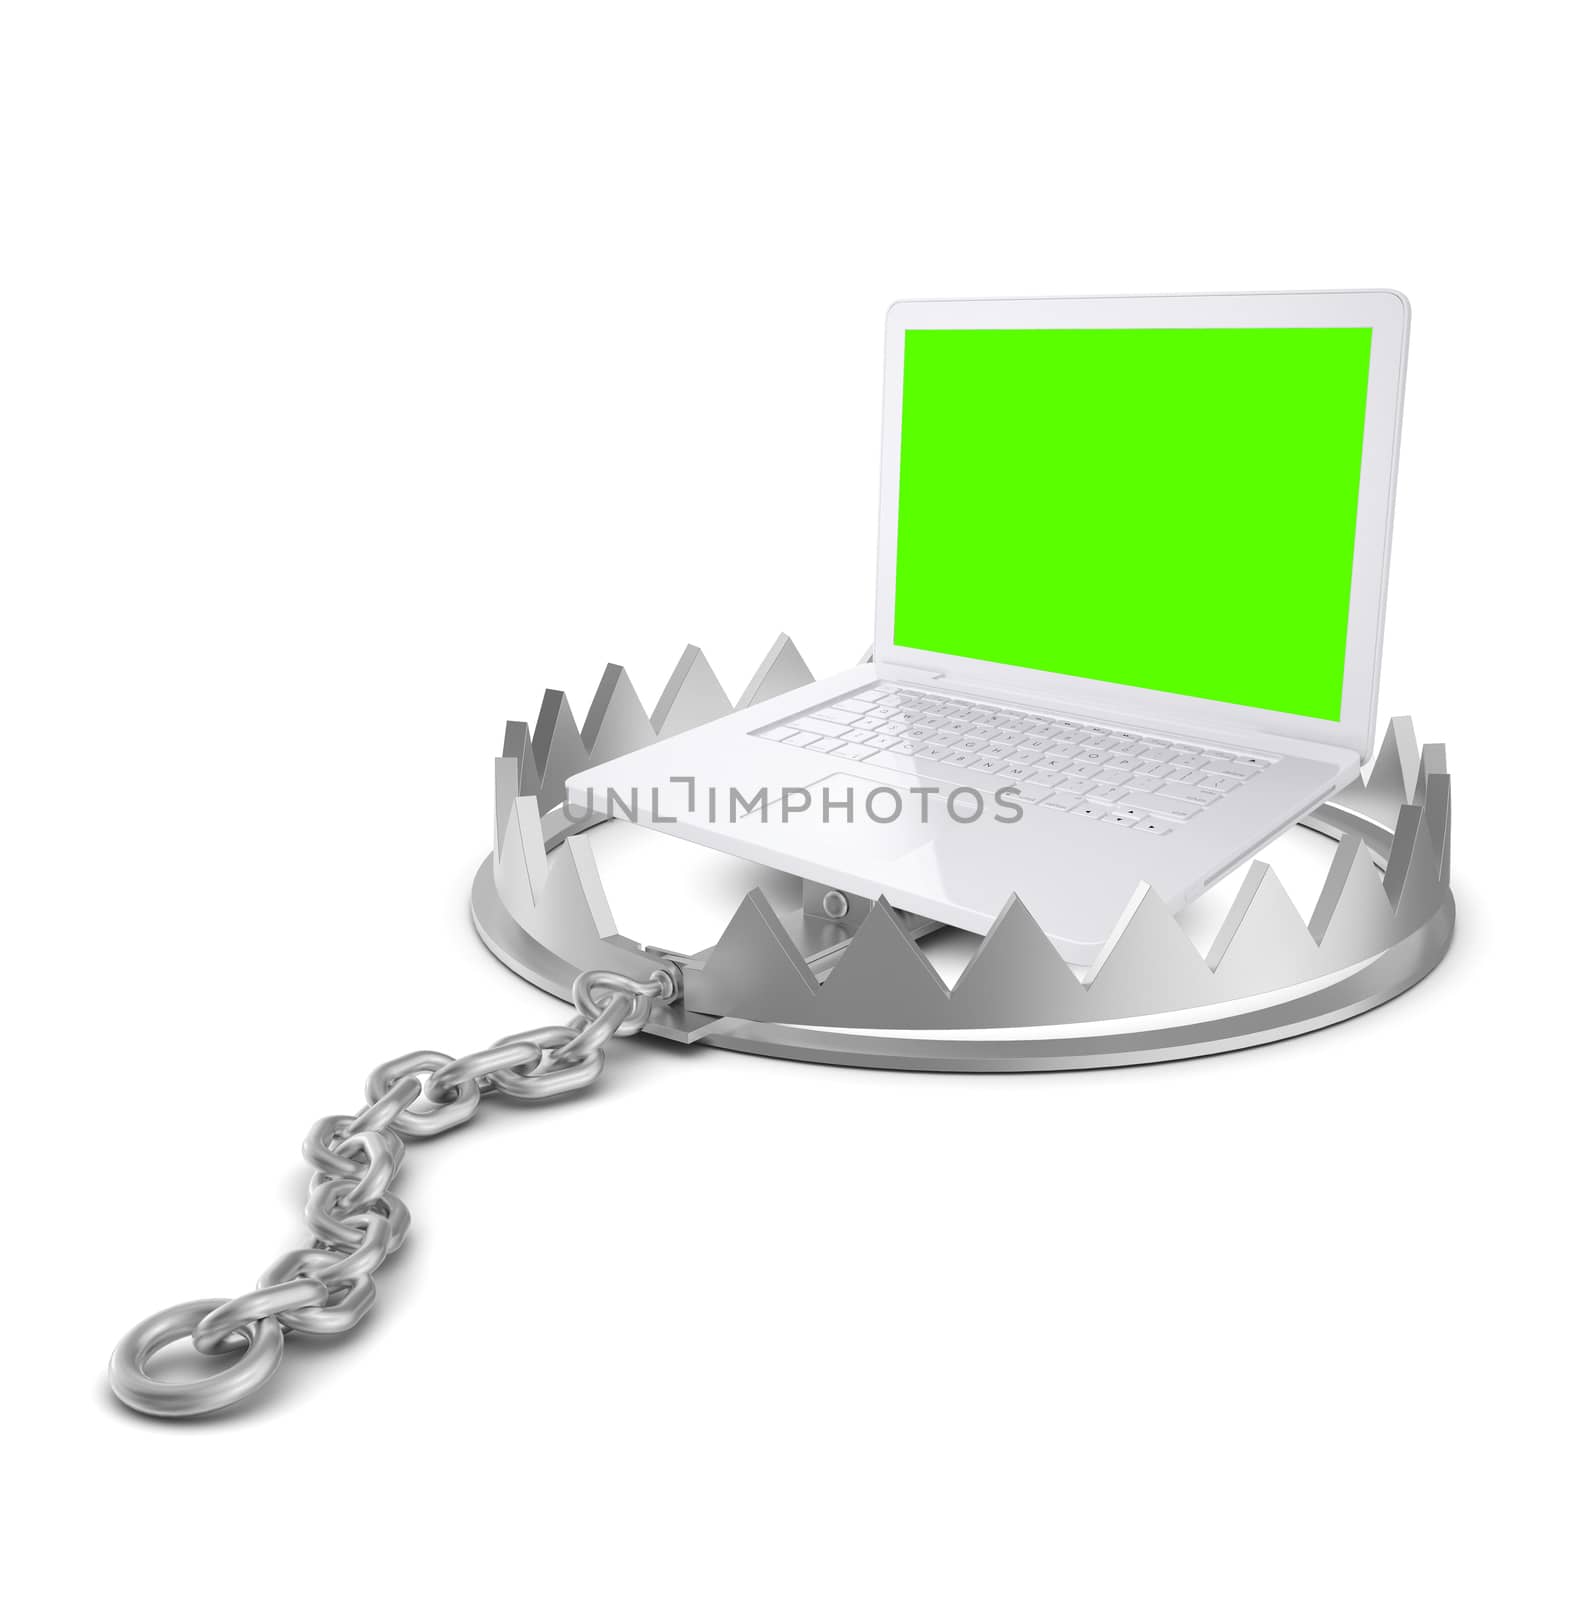 Laptop in bear trap on isolated white background, close-up view